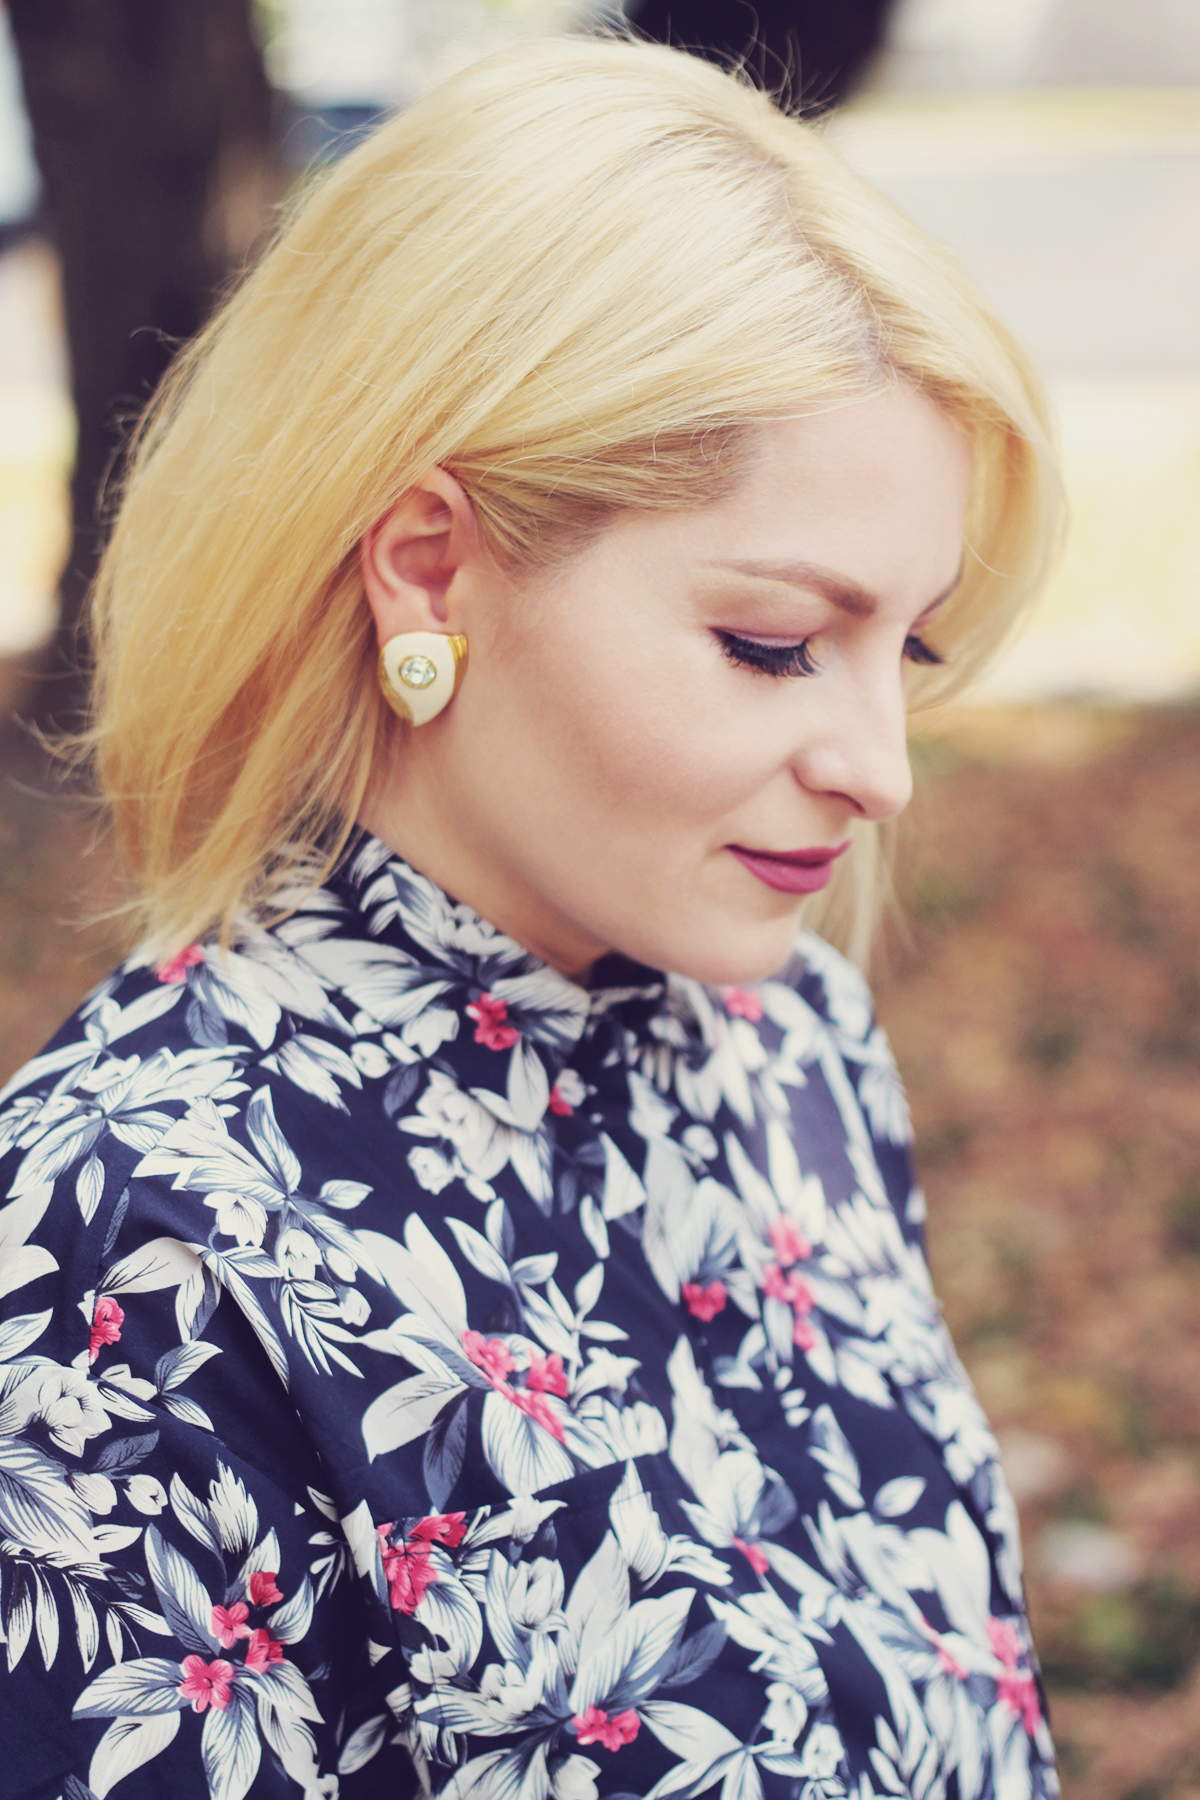 florals for fall, summer look, occasion, date night, floral shirt, vintage clip earrings, pink lips